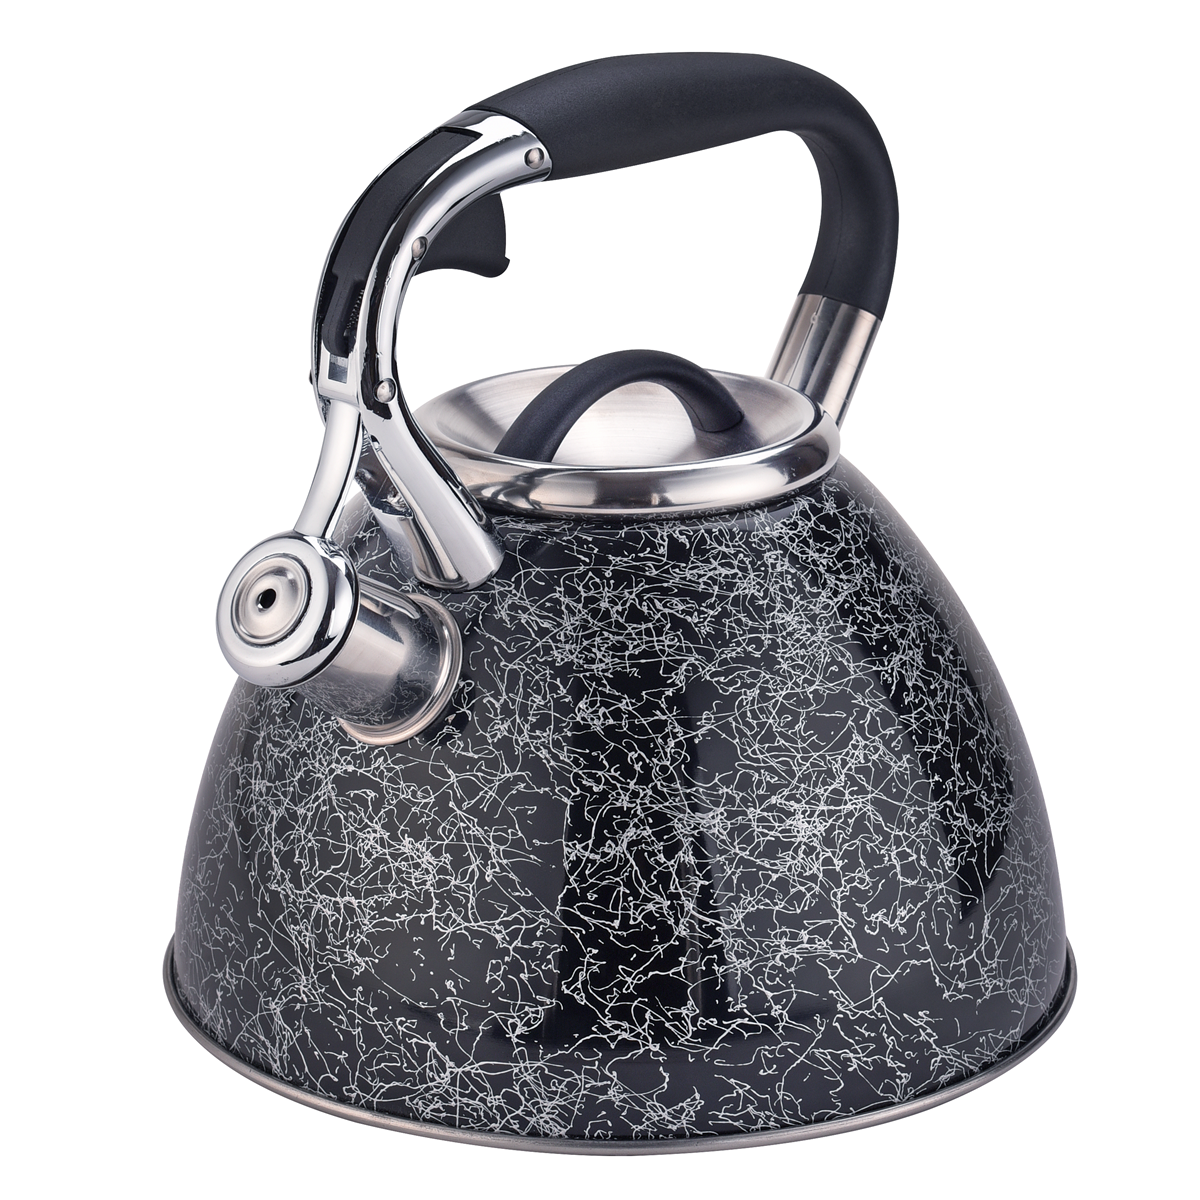 Large capacity stainless steel kettle